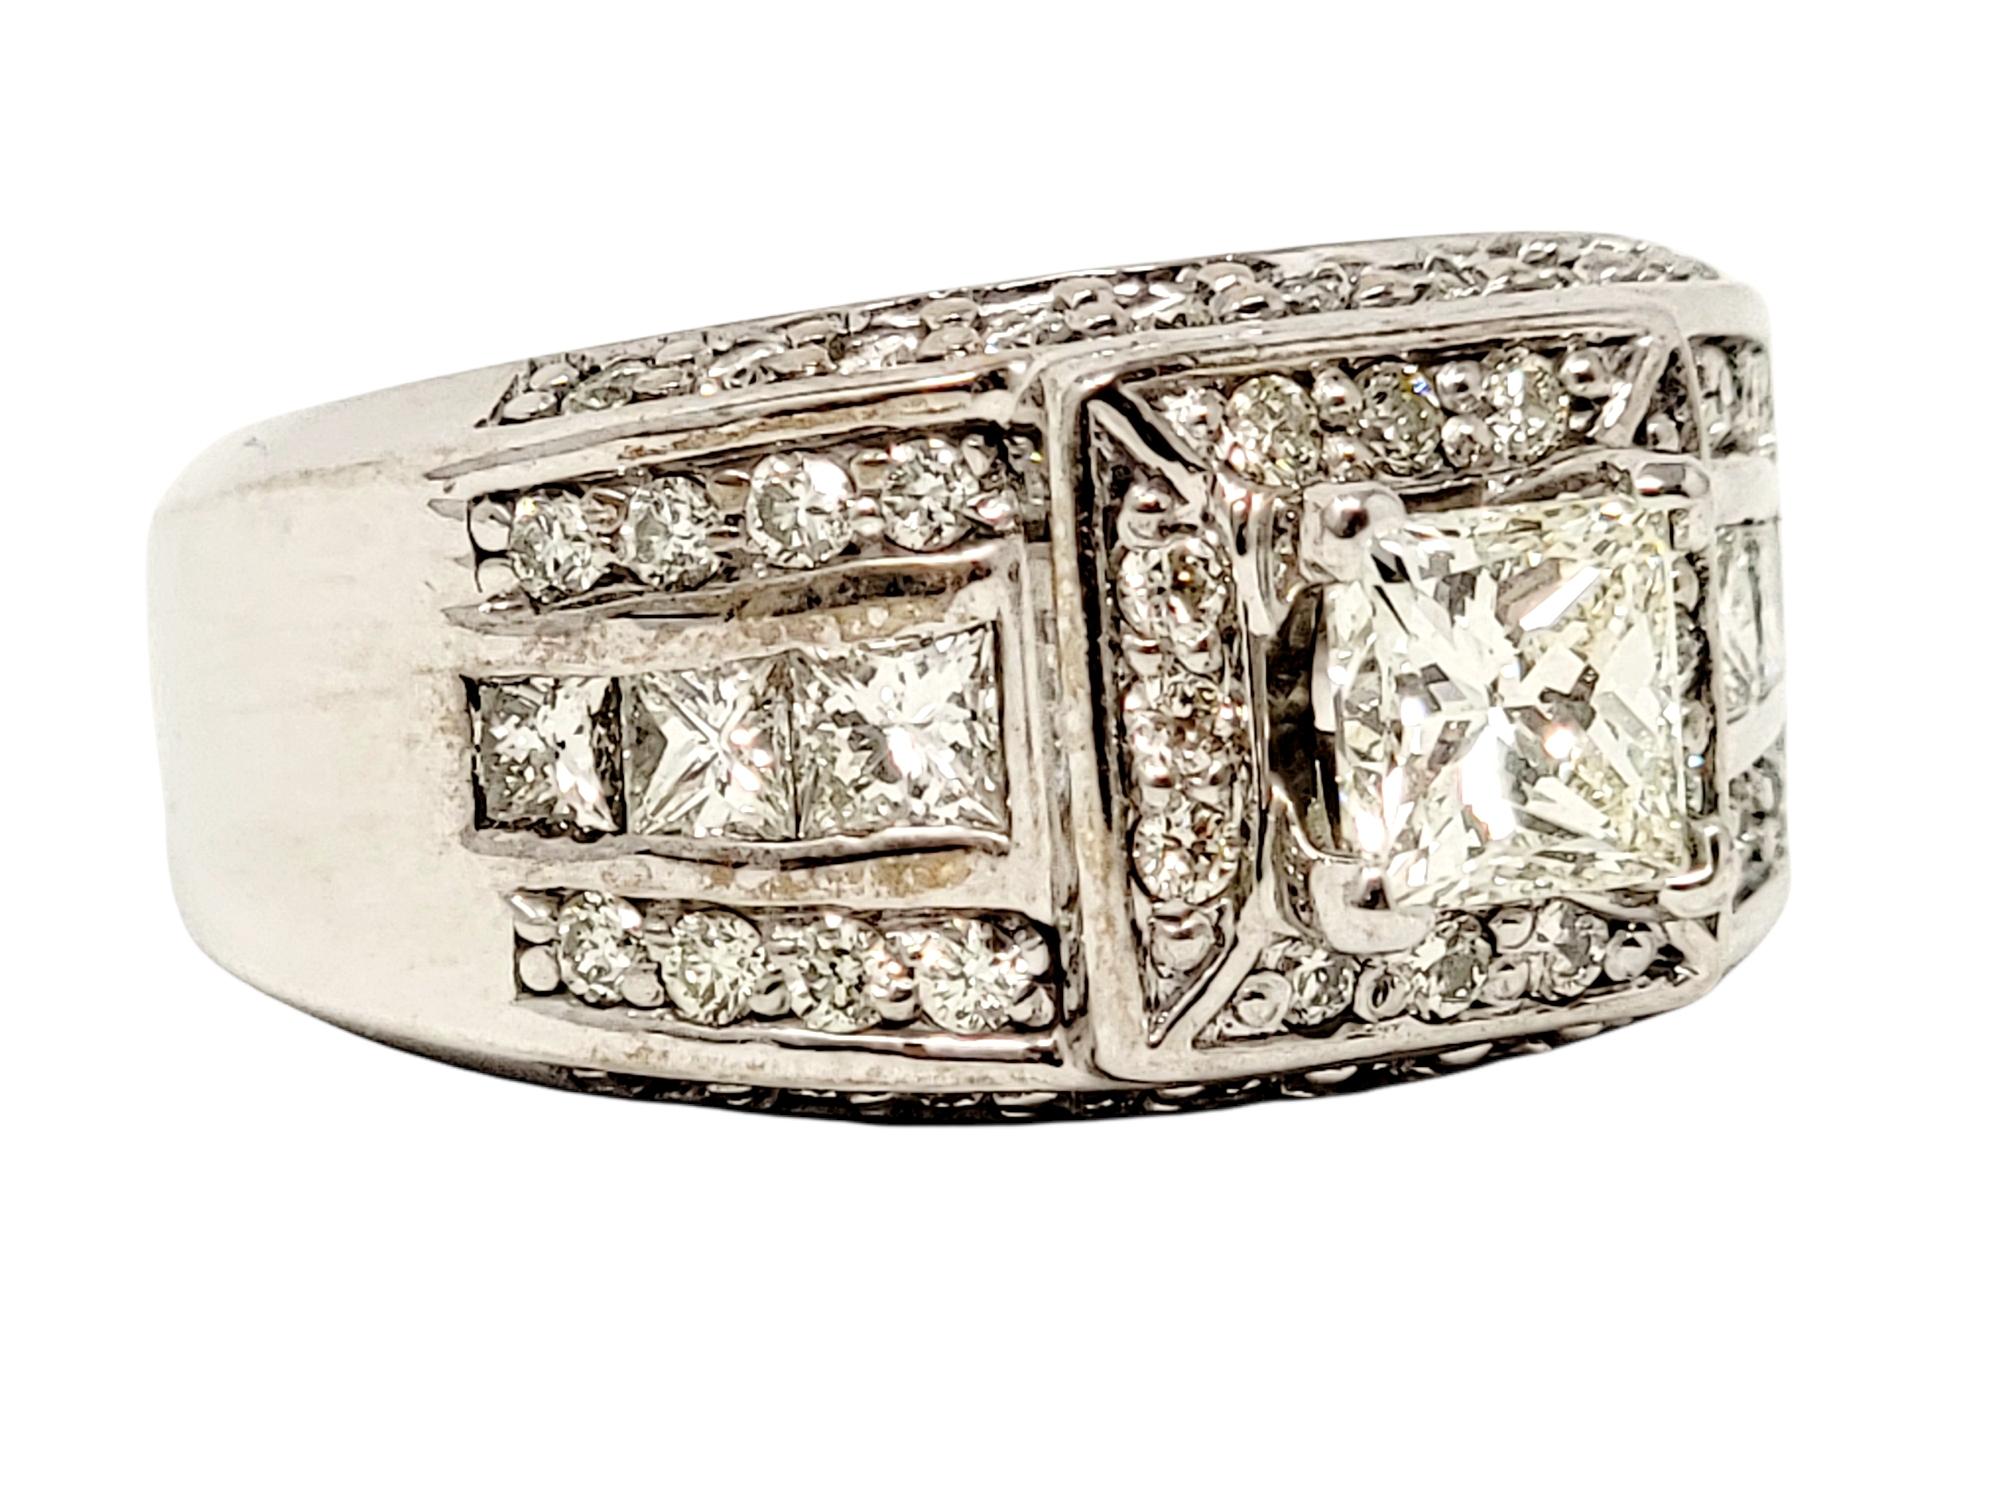 Princess Cut Diamond Wide Multi-Row Engagement Band Ring 14 Karat White Gold In Good Condition For Sale In Scottsdale, AZ